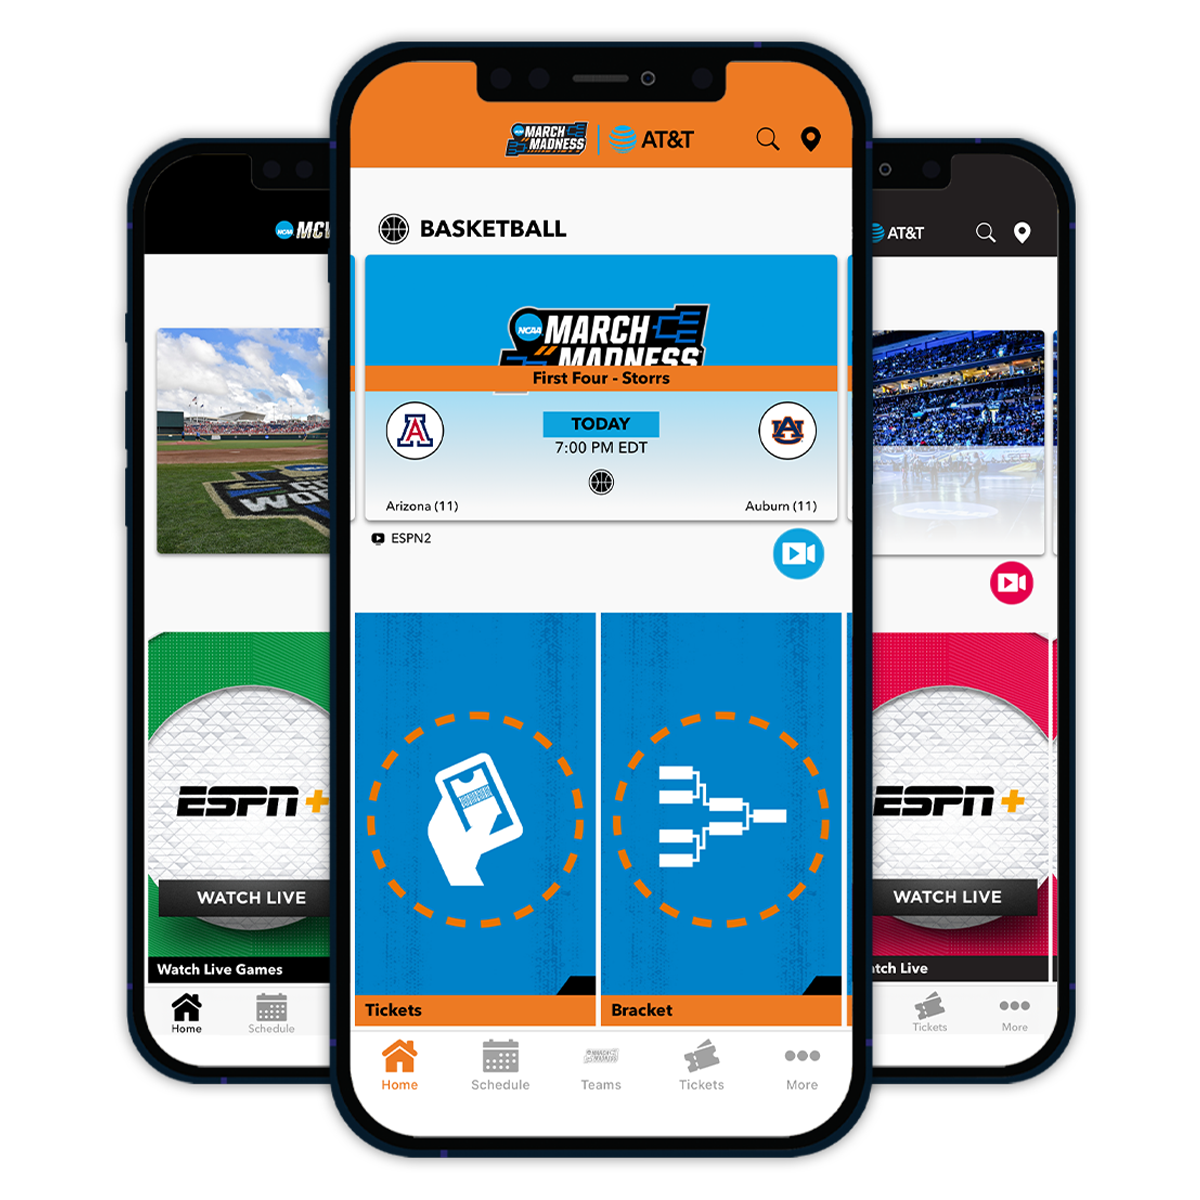 NCAA march madness app images